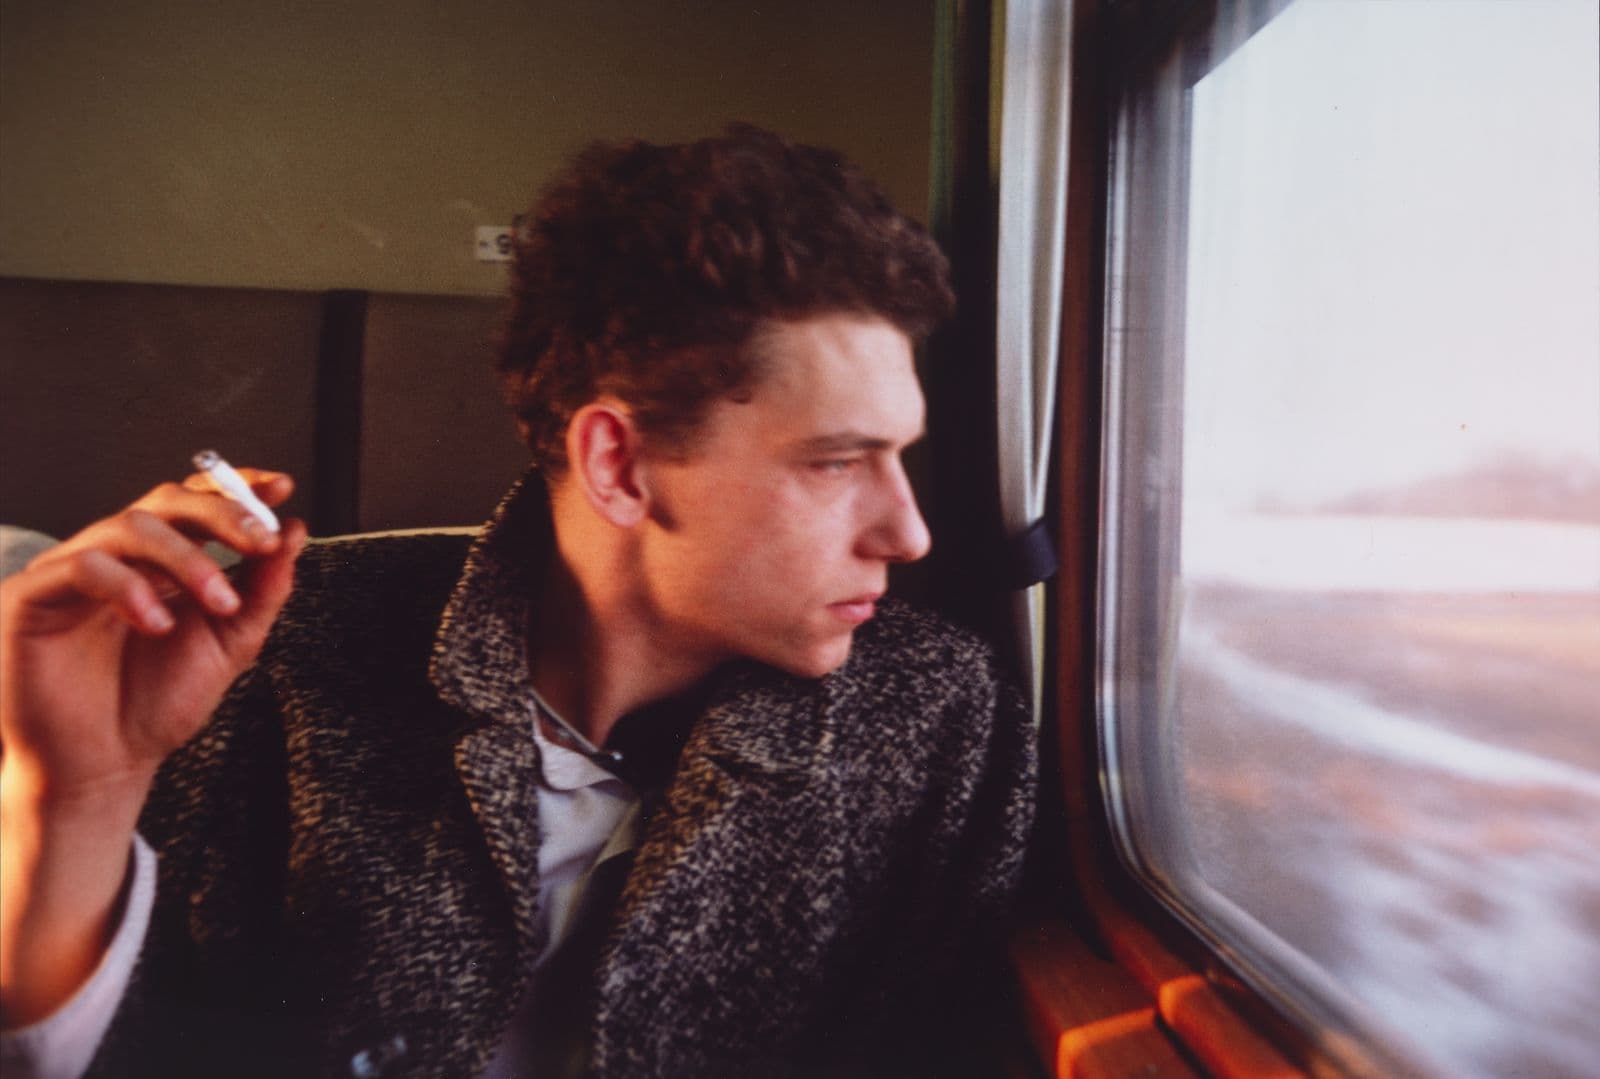 Friends of artist Nan Goldin looking out of a window on a train whilst smoking a cigarette.